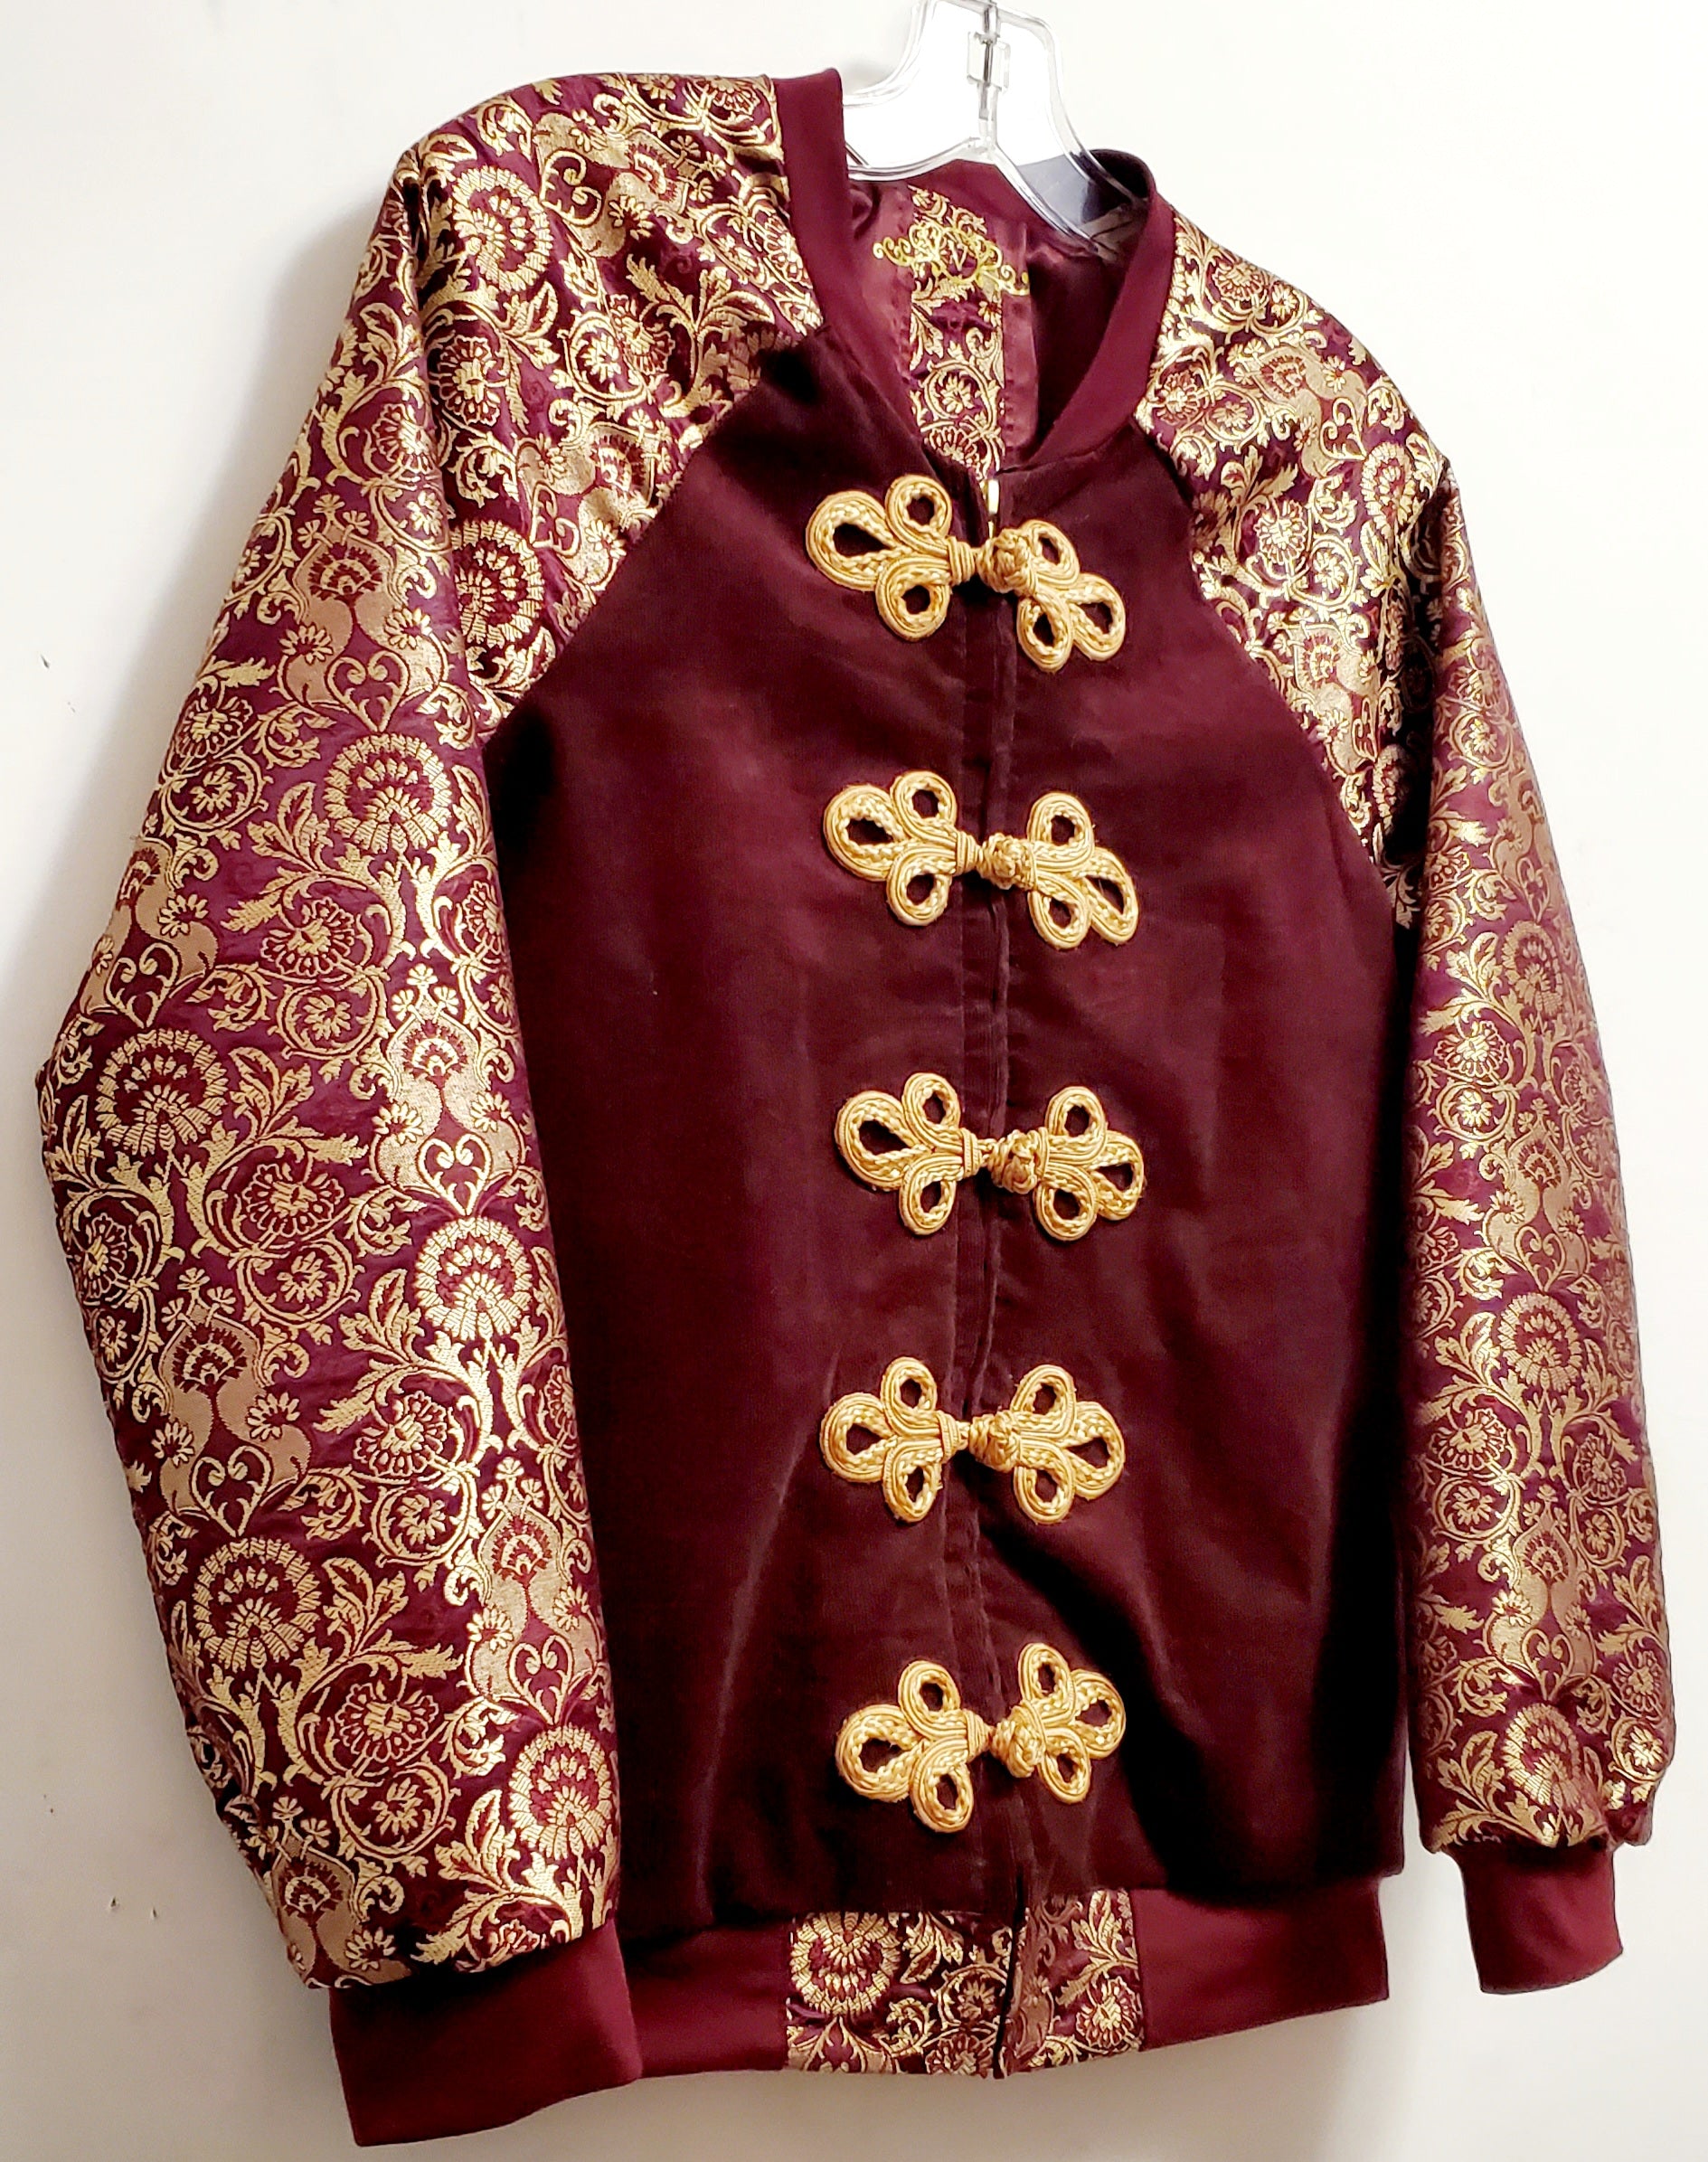 side front view of Burgundy corduroy bomber jacket with metallic gold sleeve and knot closures